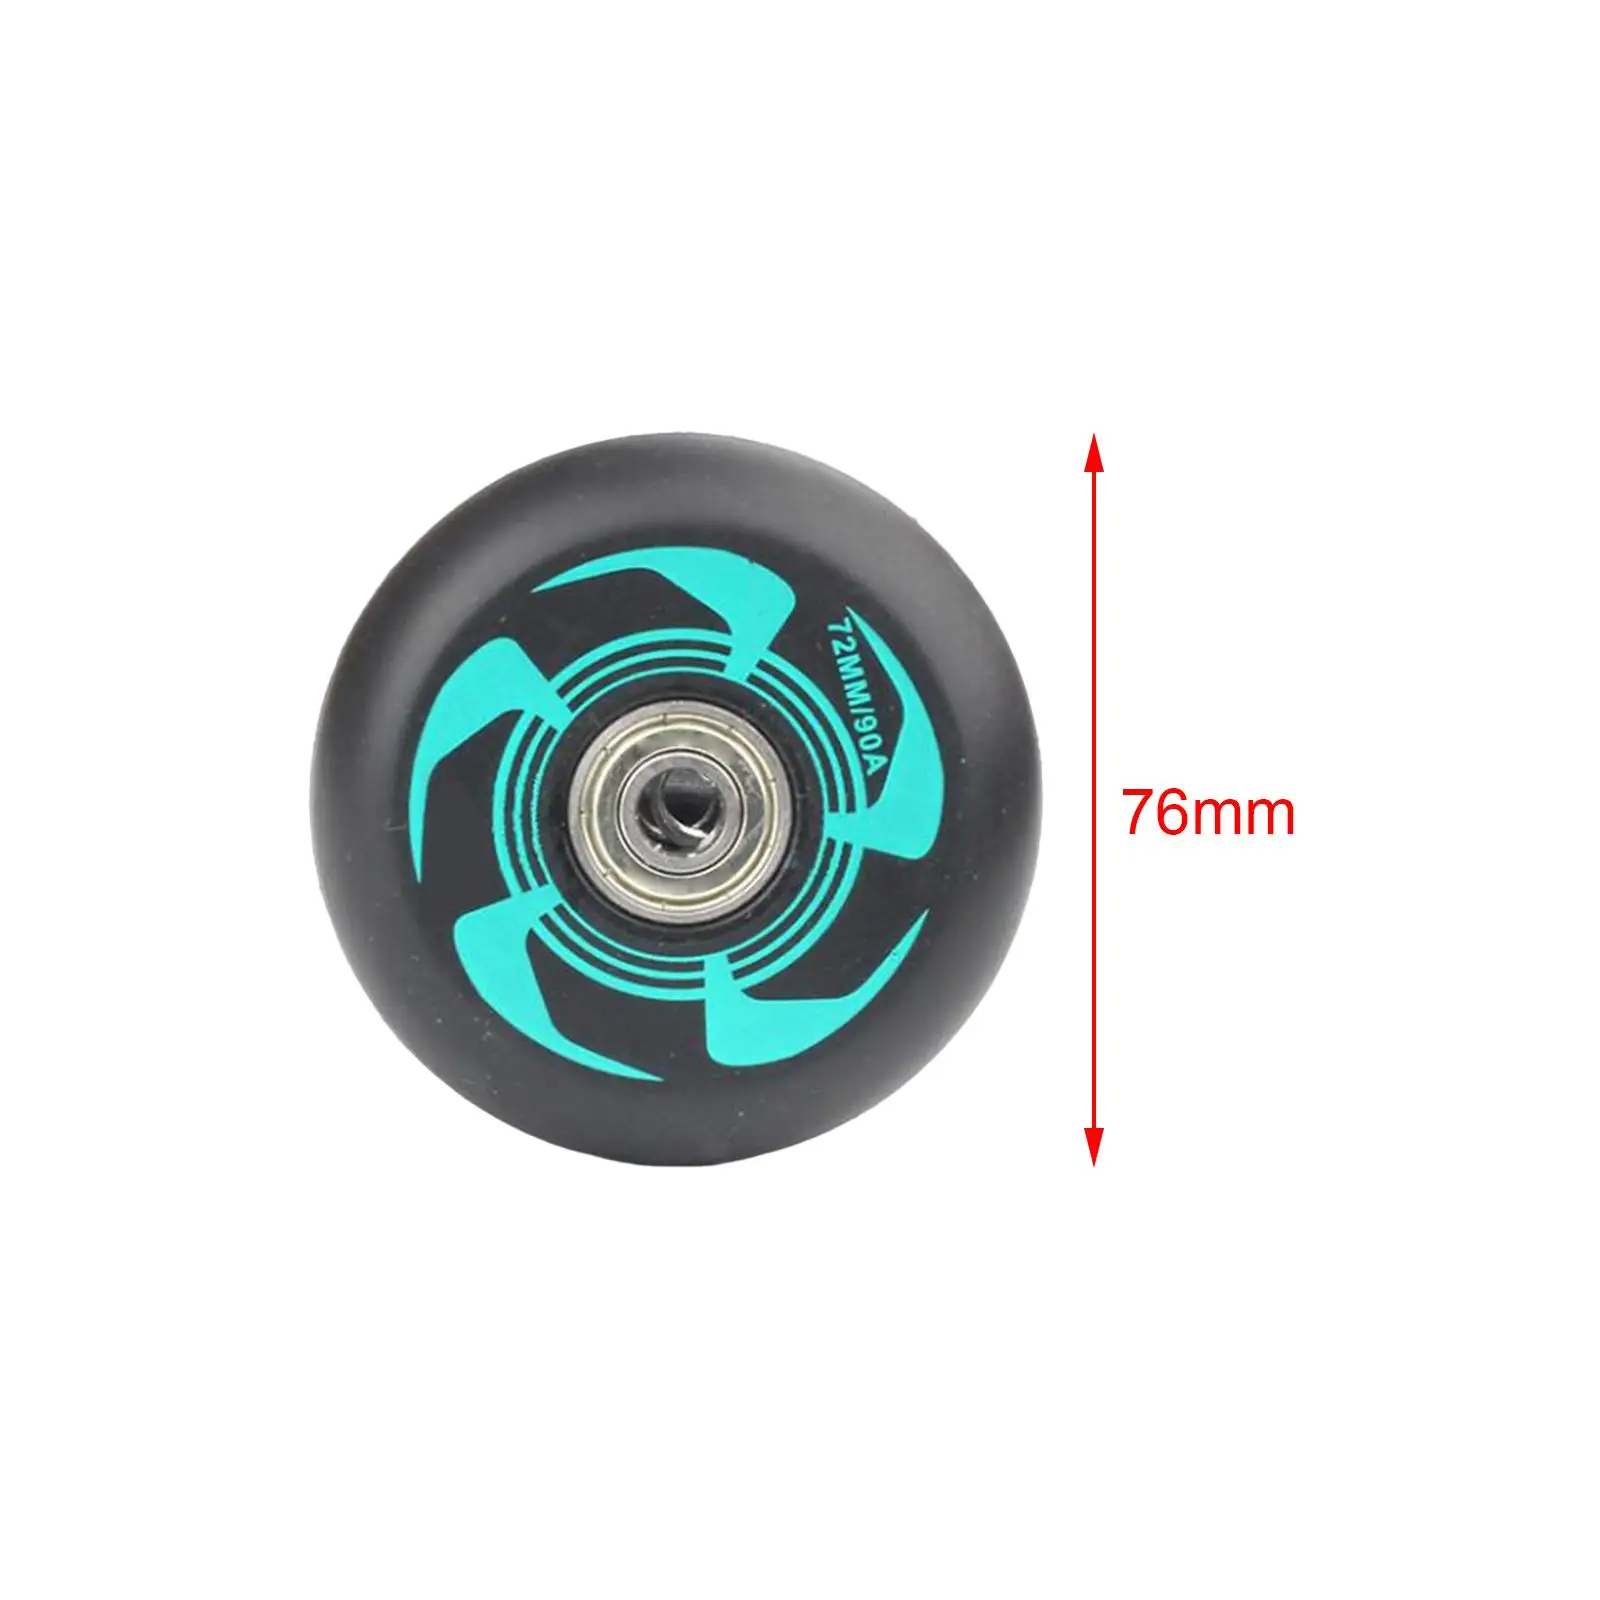 Inline Roller Skate Wheel Replacement Roller Shoes Skating Hockey Wheels for Indoor Outdoor Scooters Luggage Wheel Practice